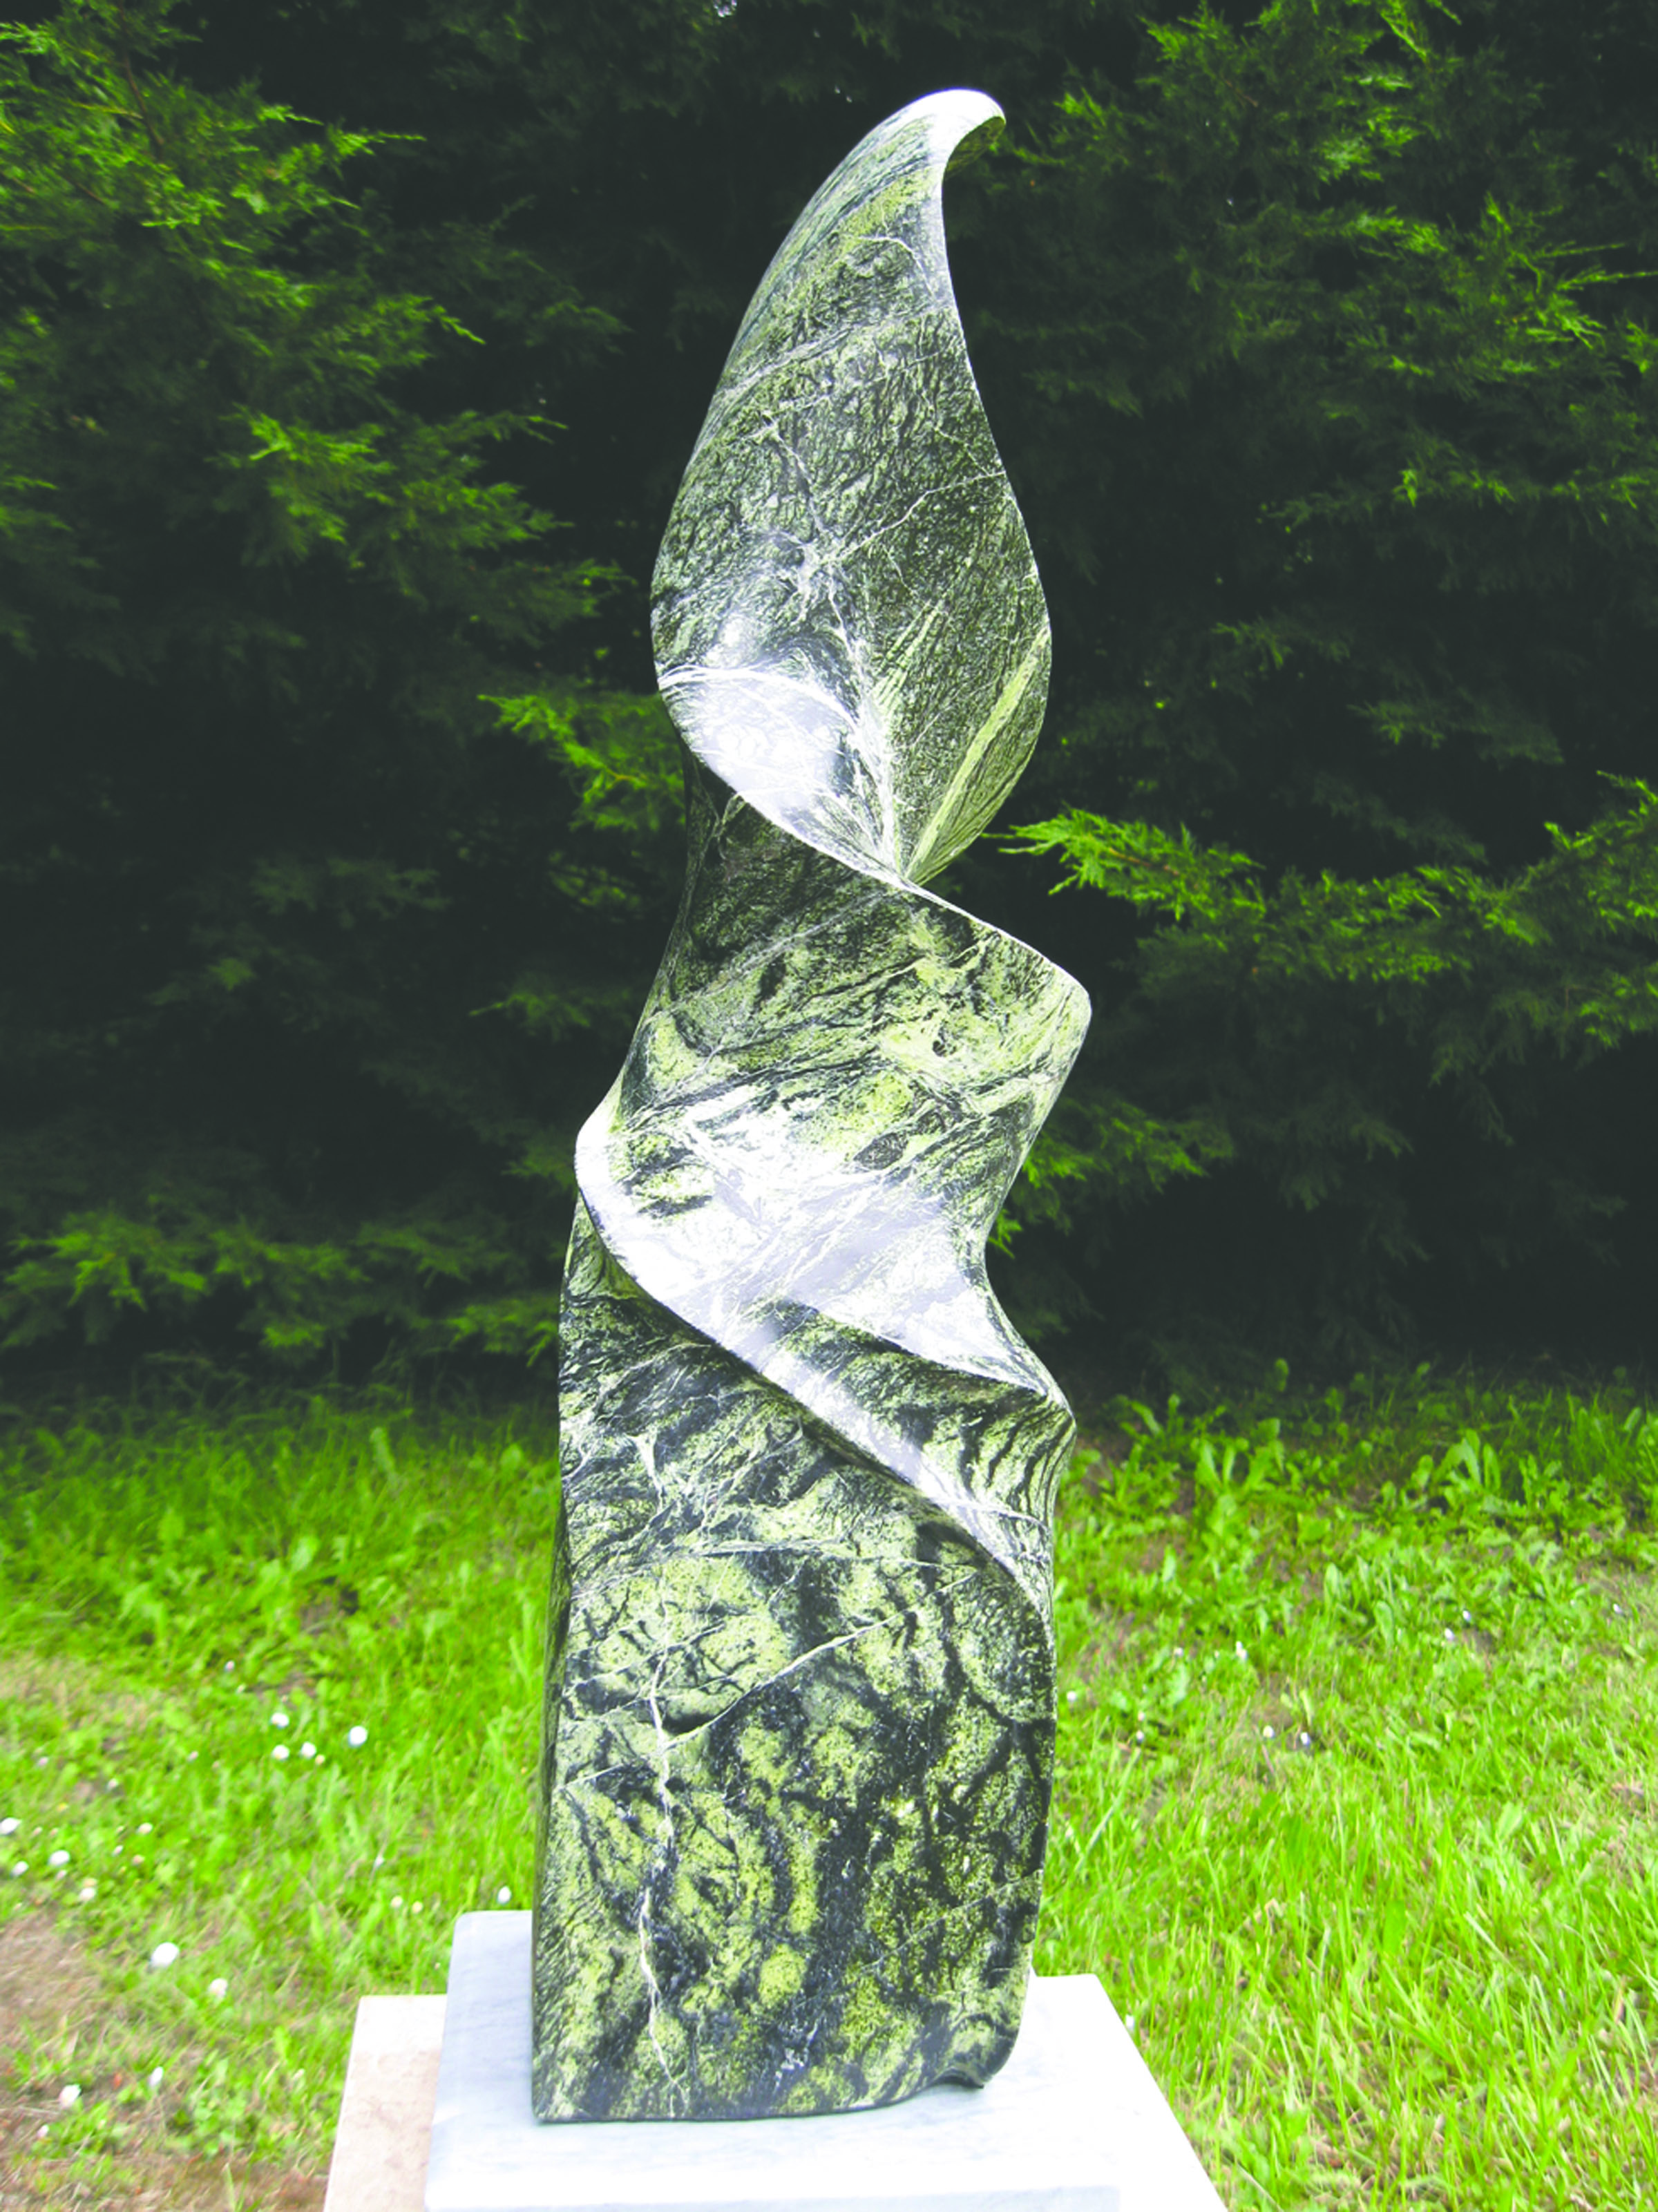 This stonework by sculptor Arliss Newcomb will be on display from 10 a.m. to 4 p.m. Saturday and Sunday during an open house at her studio